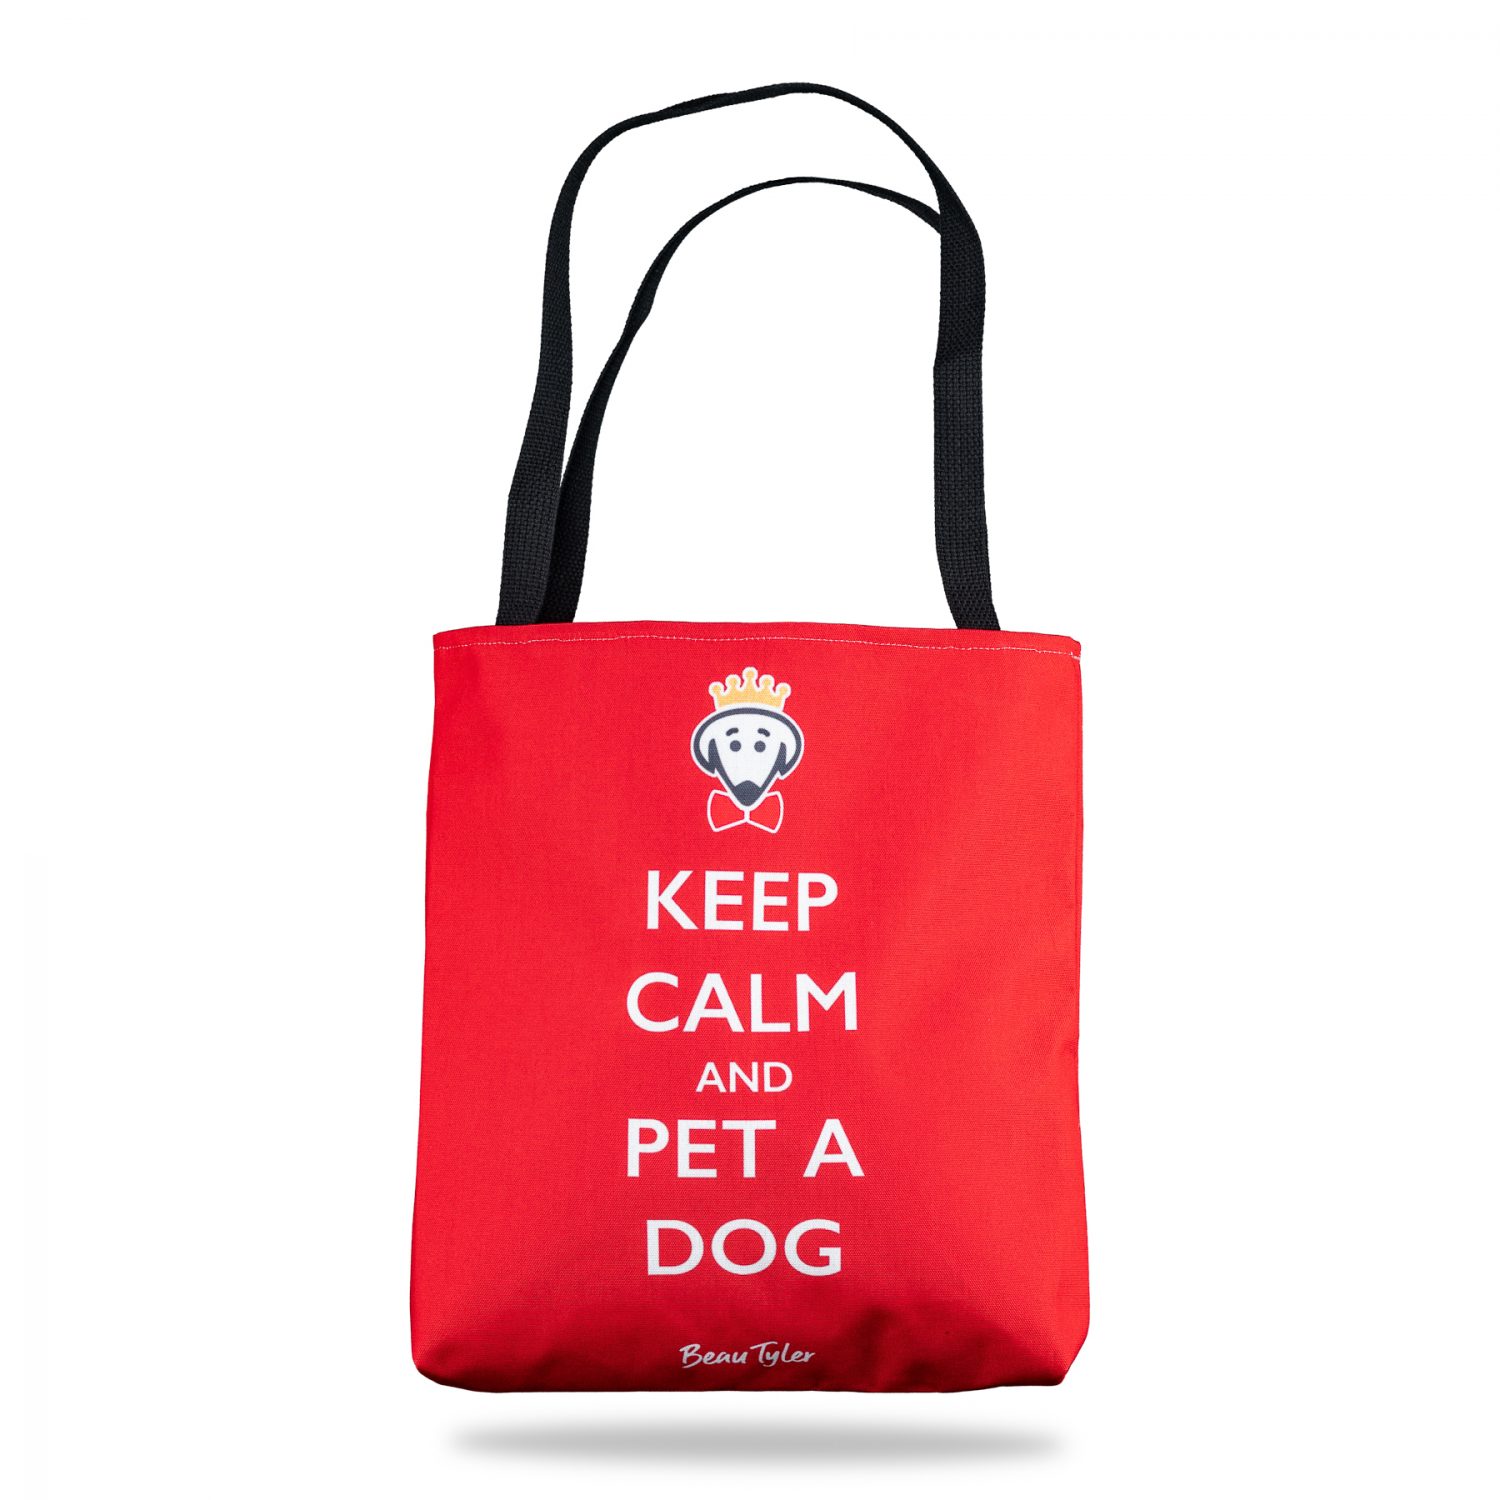 Beau Tyler - Keep Calm and Pet A Dog red tote bag back